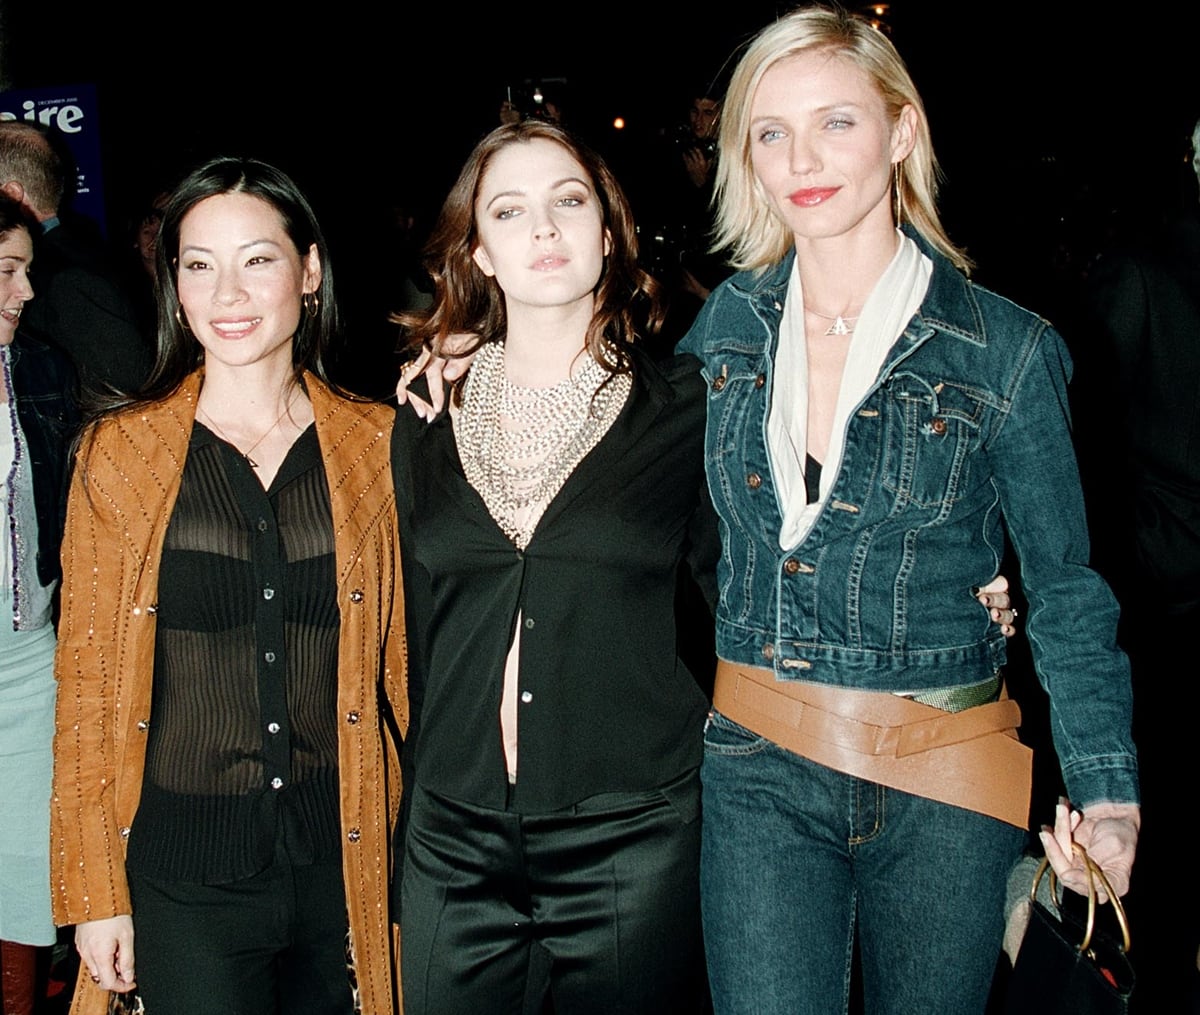 Lucy Liu, Drew Barrymore, and Cameron Diaz attend the "Charlie's Angels" New York City Premiere